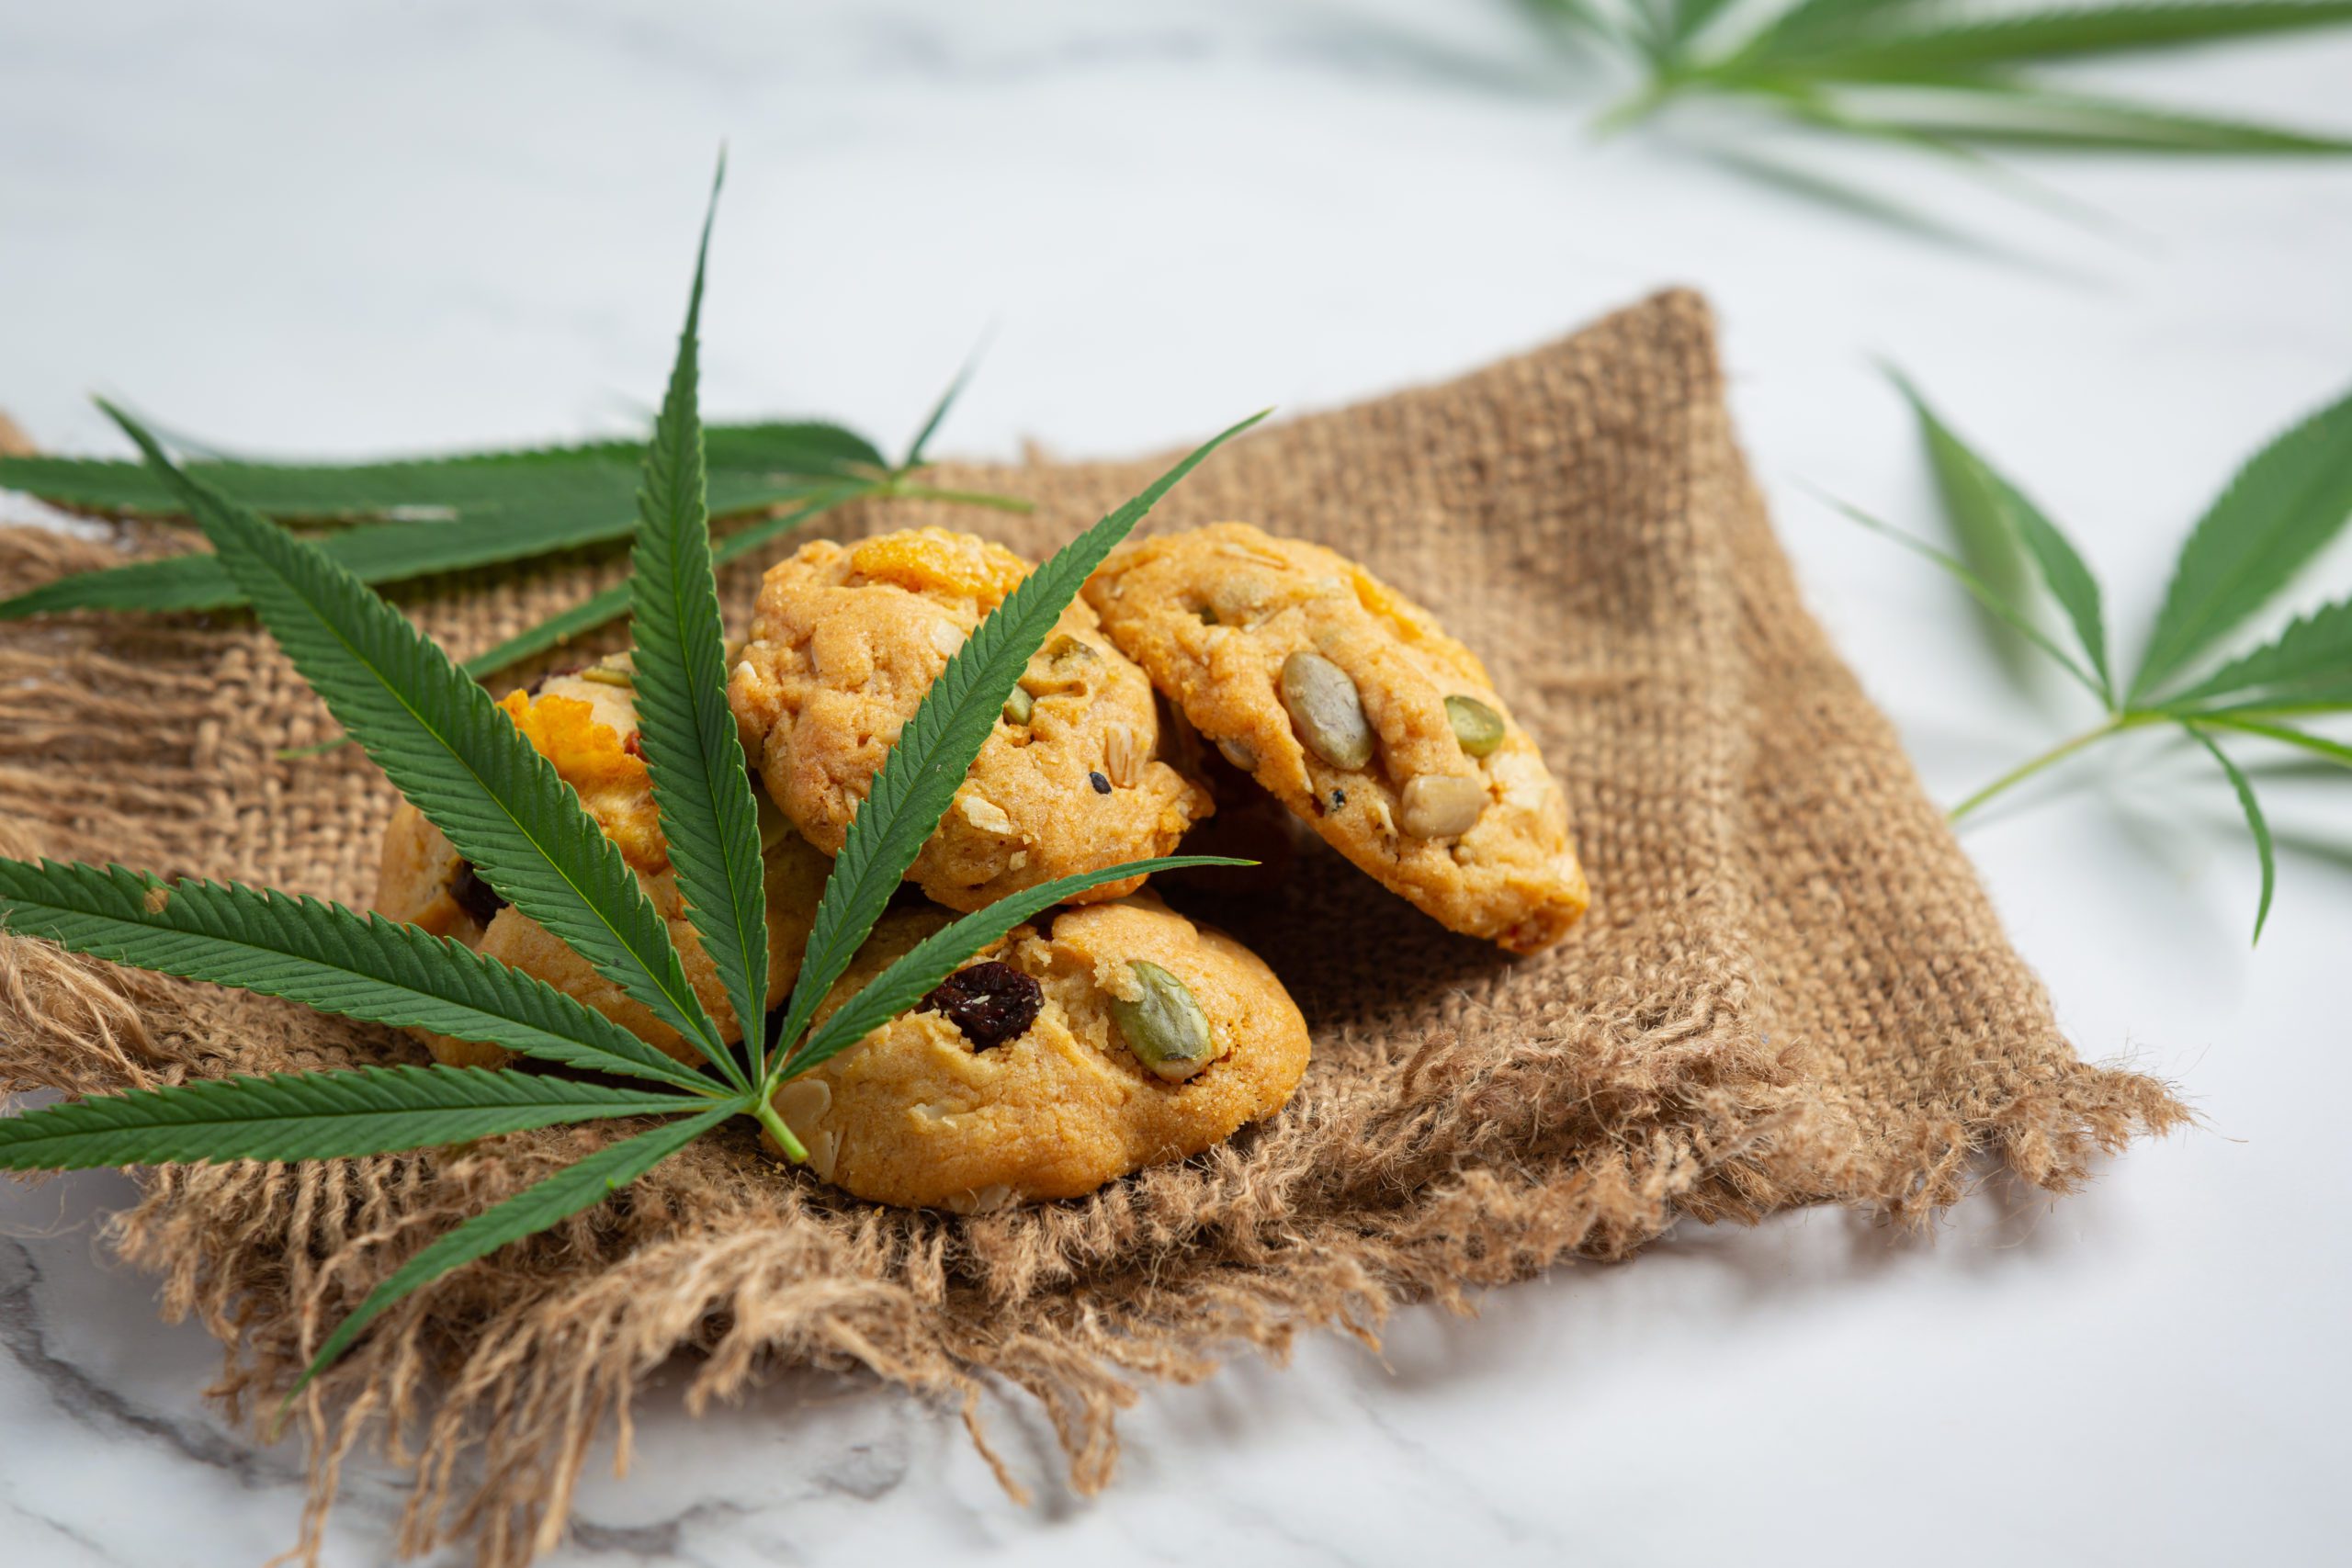 cannabis cookies and cannabis leaves put on fabric